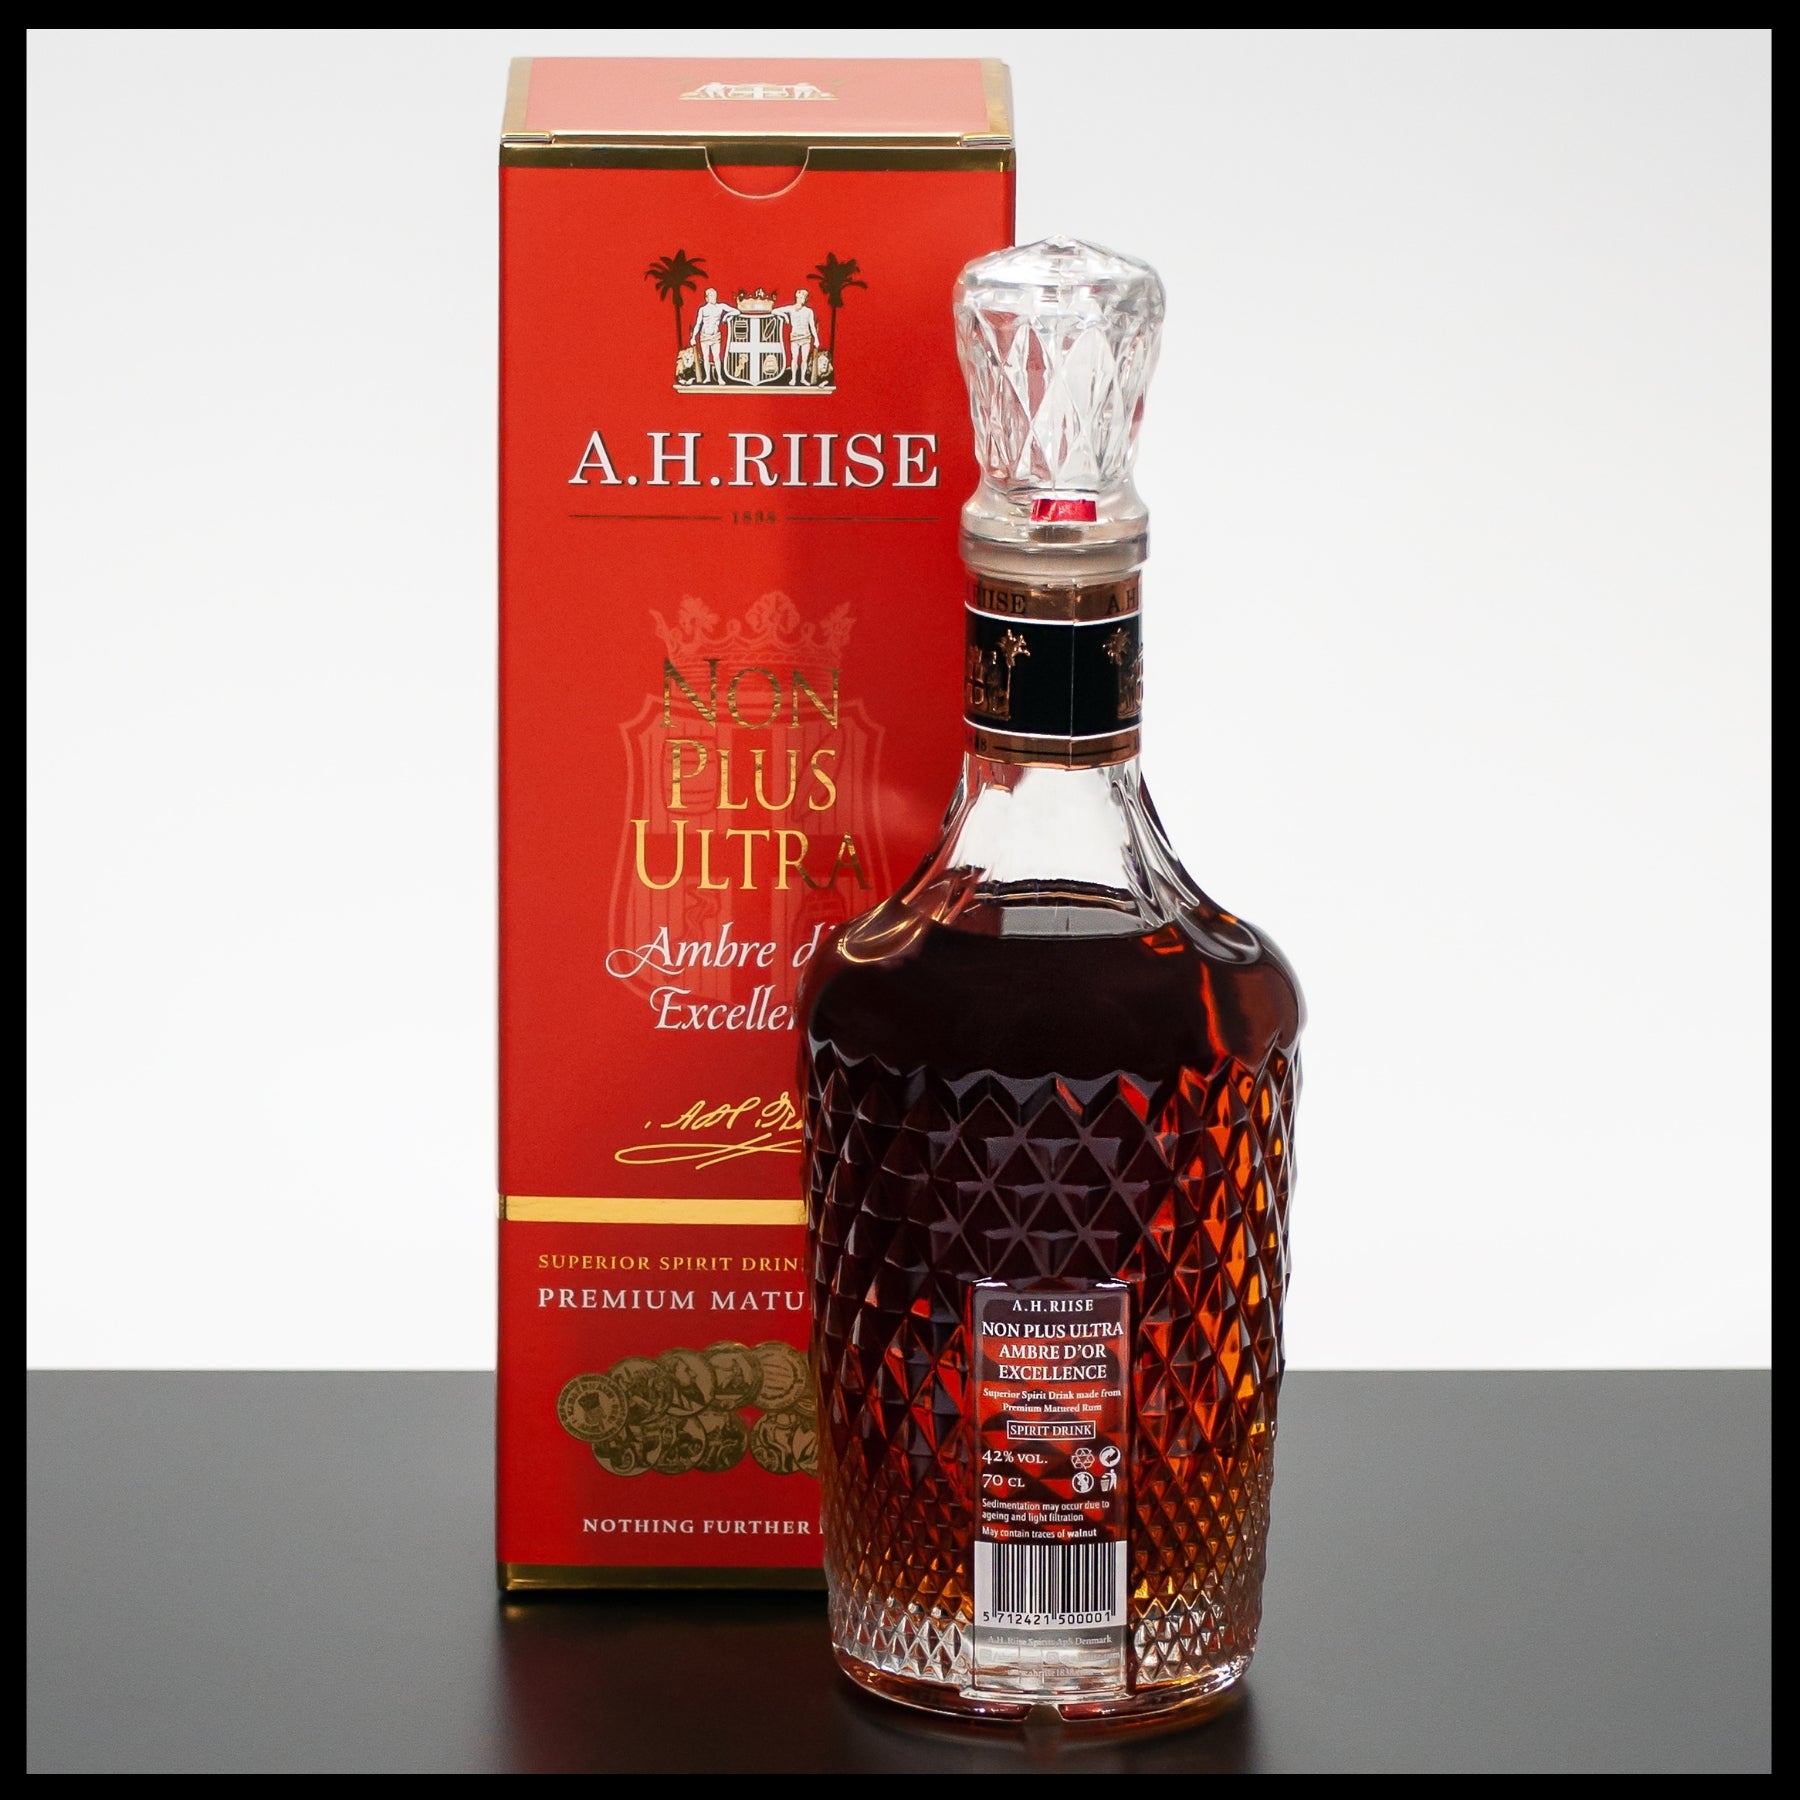 A.H. Riise Non Plus Ultra Ambre d'Or Excellence 0,7L - 42% - Trinklusiv